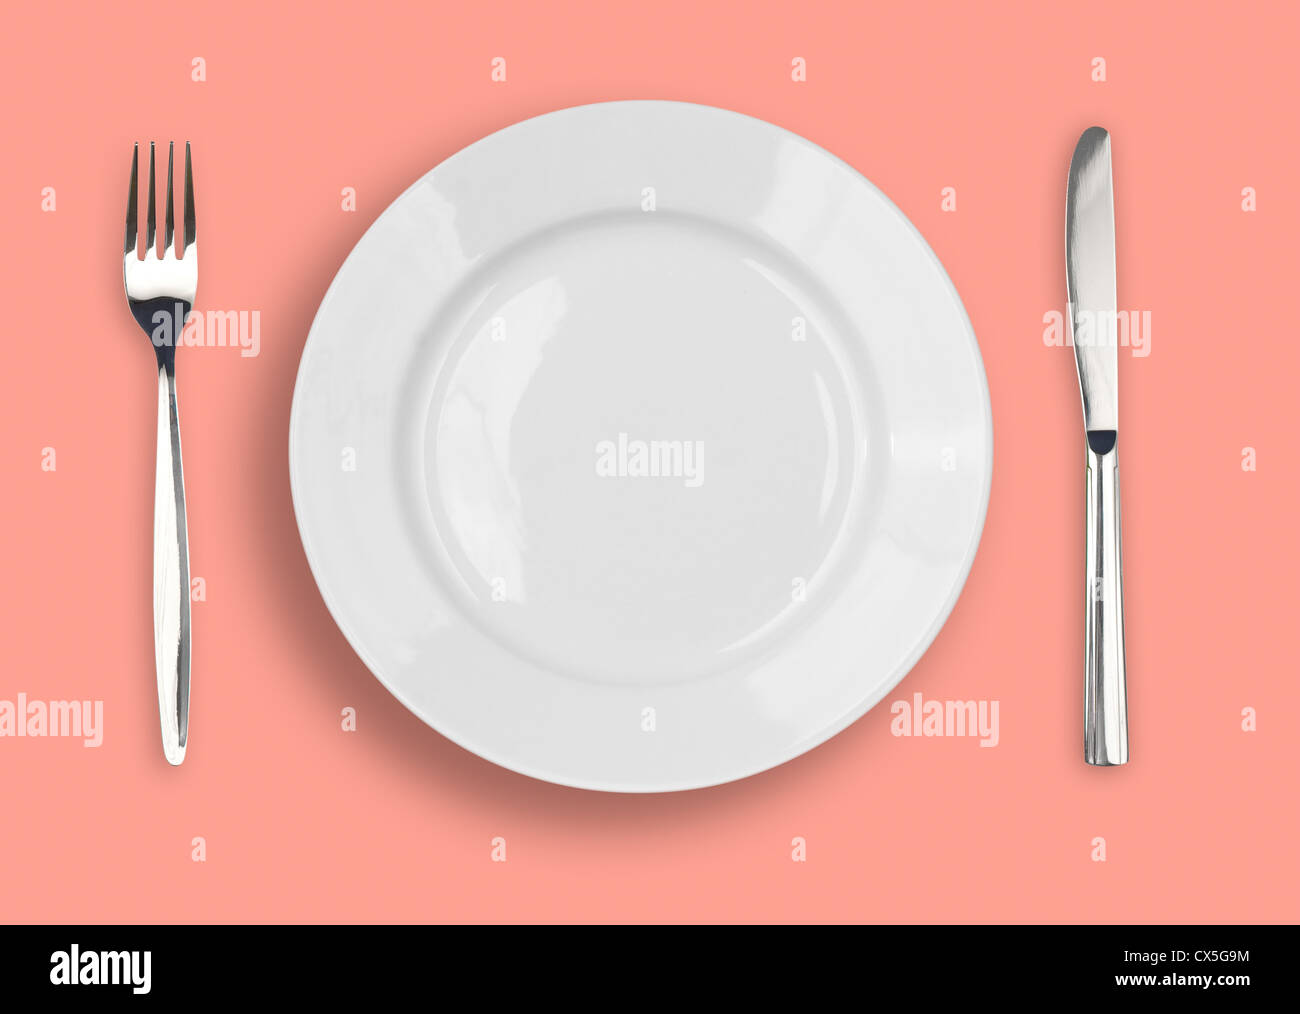 Knife, white plate and fork on rose background Stock Photo